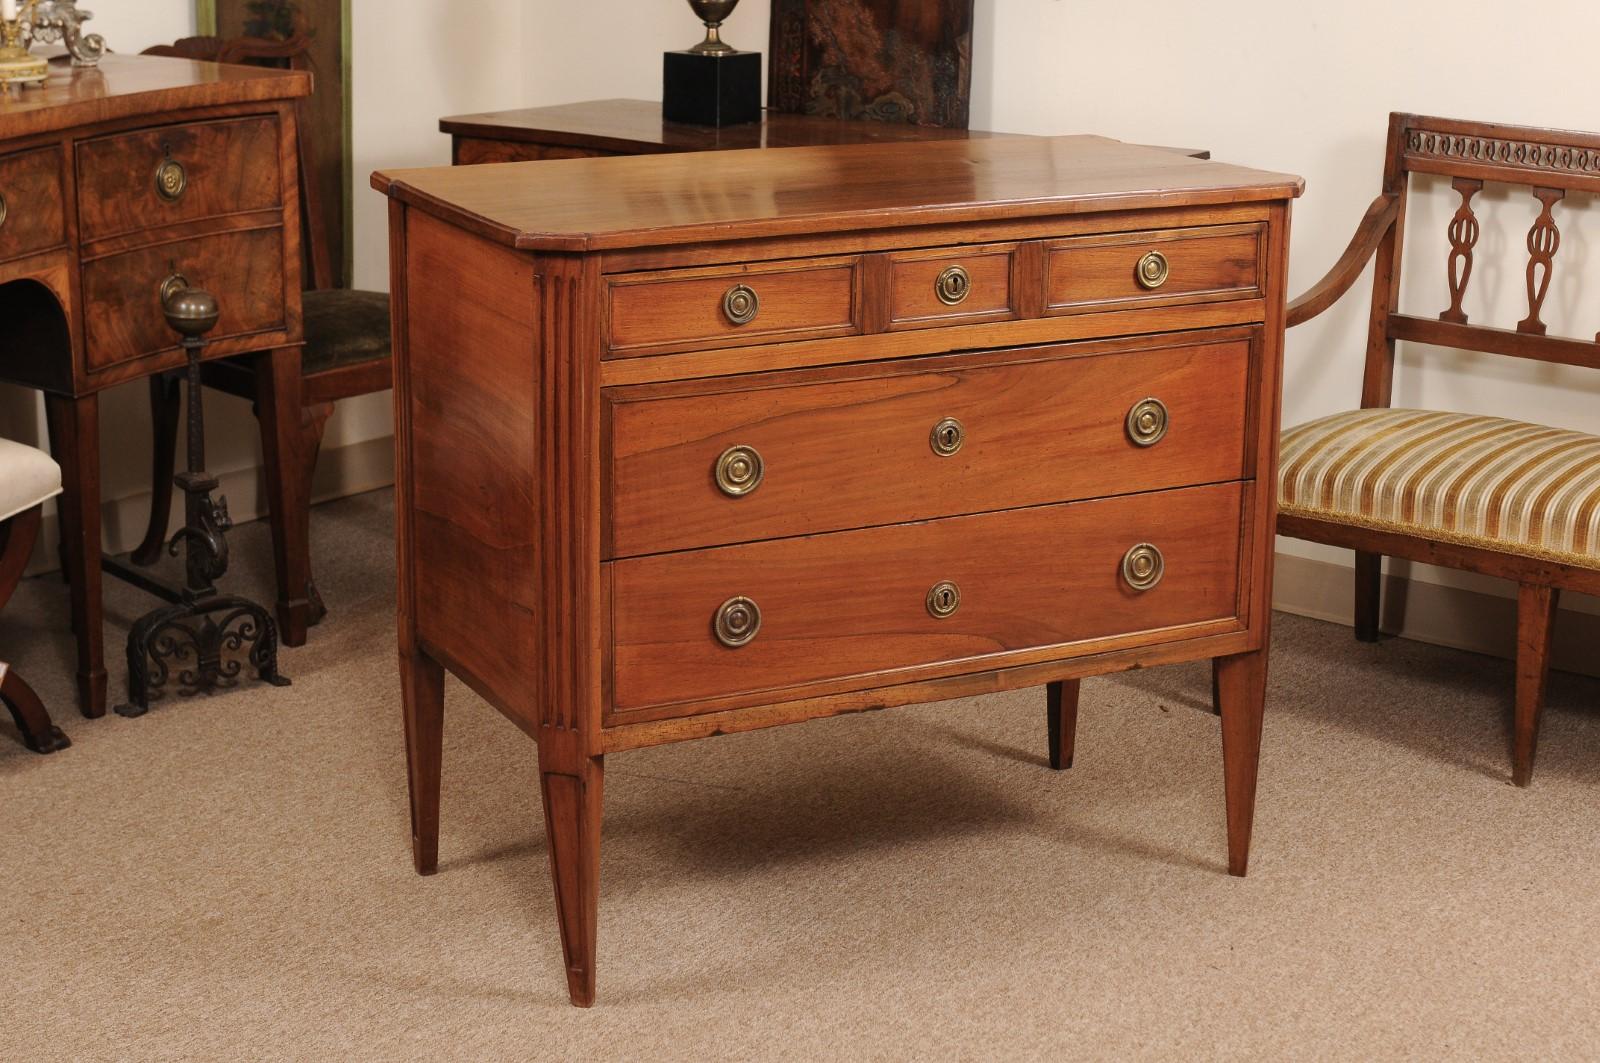 The late 18th century Louis XVI commode in light walnut with canted corners, fluted carving and 5 drawers terminating in tapered legs.